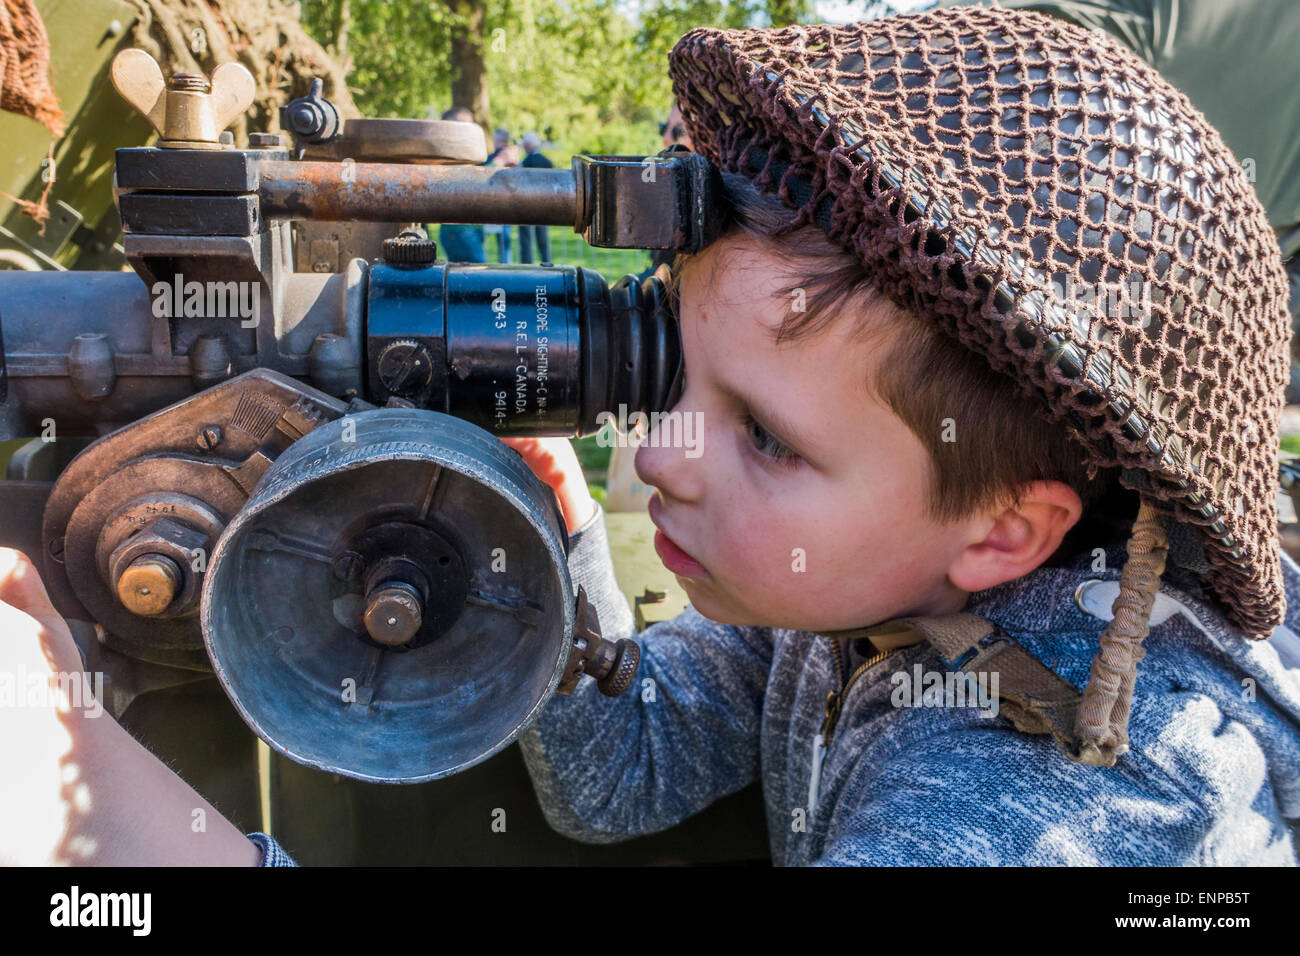 London, UK. 09th May, 2015. A Russian boy has a go at aiming a 17 pounder anti-tank gun in St James Park. VE Day 70 commemorations - Three days of events in London and across the UK marking historic anniversary of end of the Second World War in Europe. Credit:  Guy Bell/Alamy Live News Stock Photo